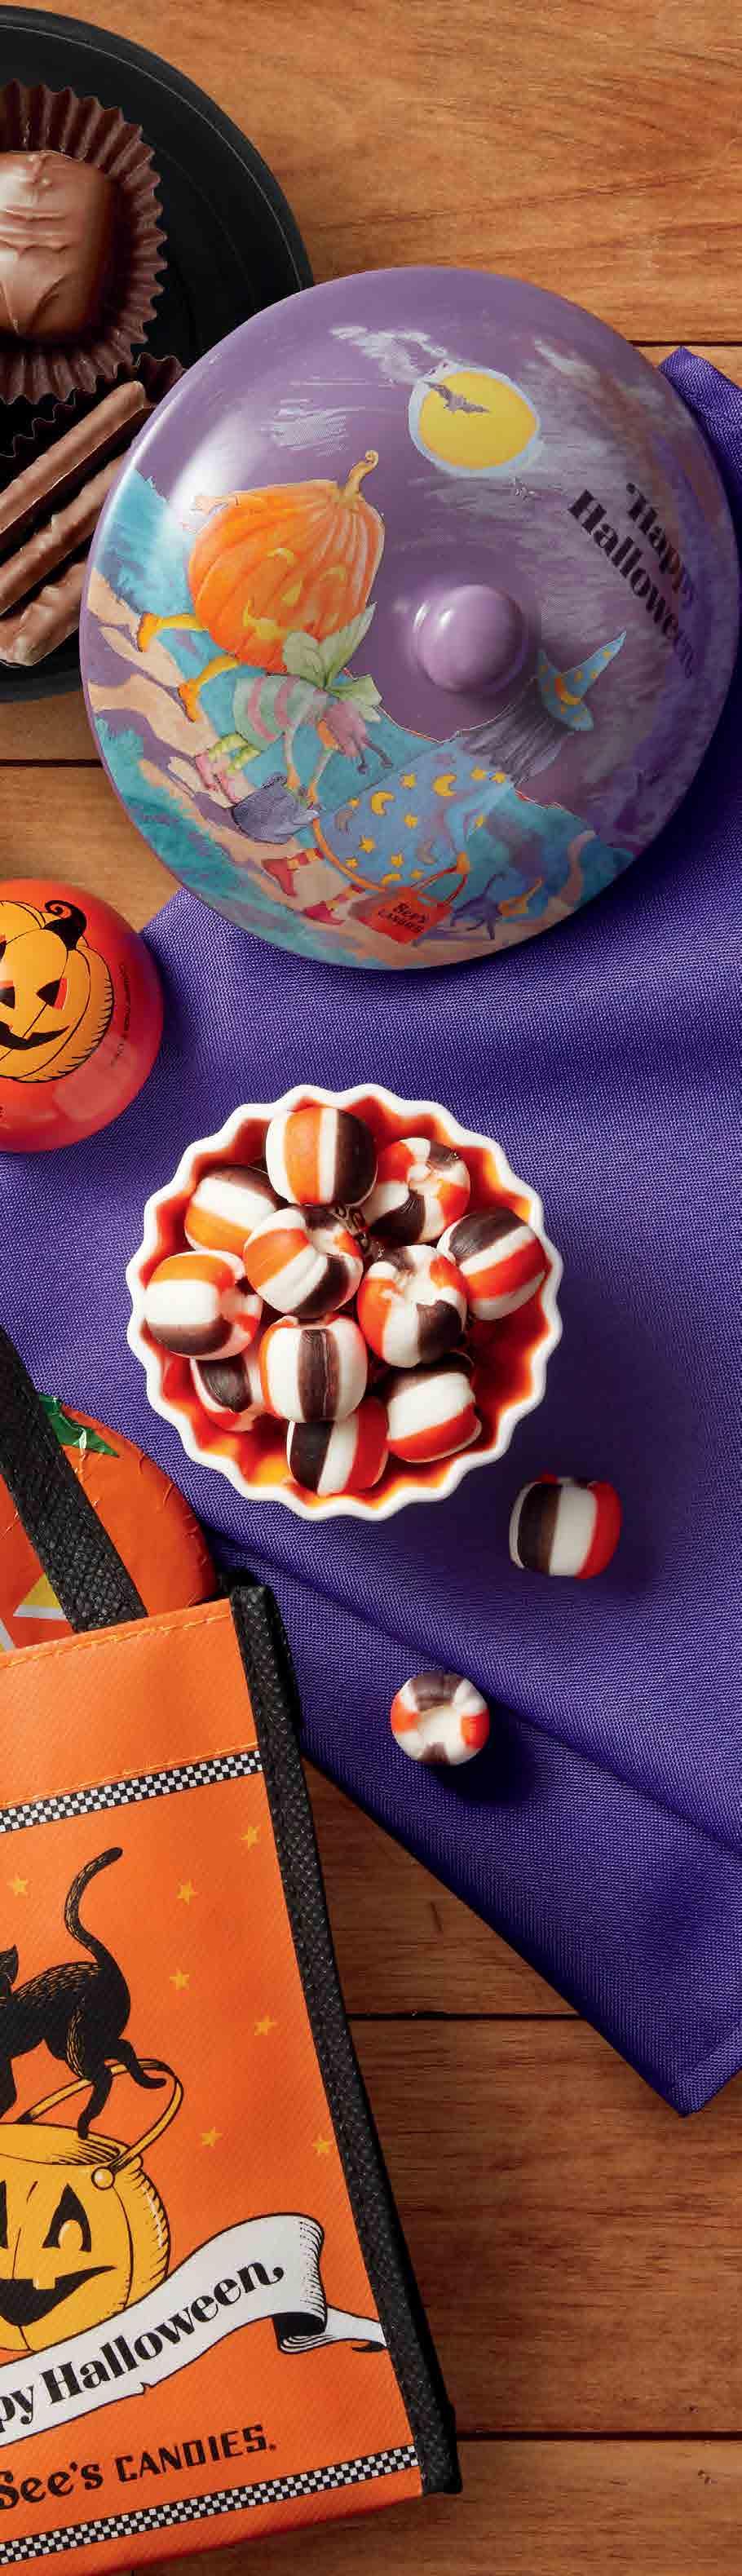 Make sure their Halloween is a sweet scream! Online only.